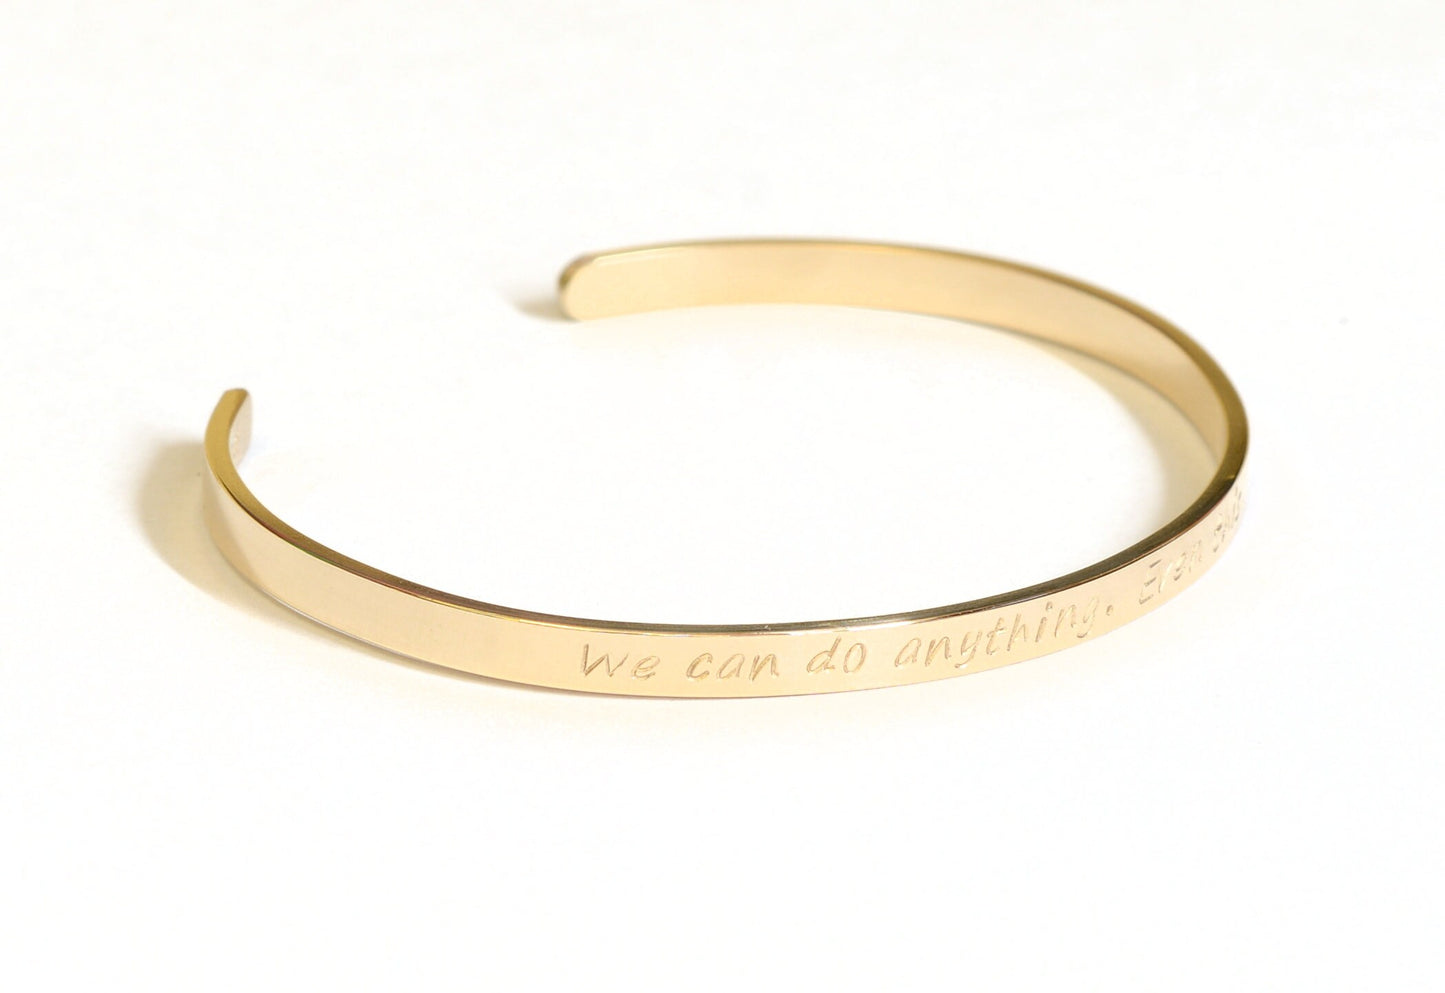 We can do anything even this 14k solid Gold Cuff Bracelet